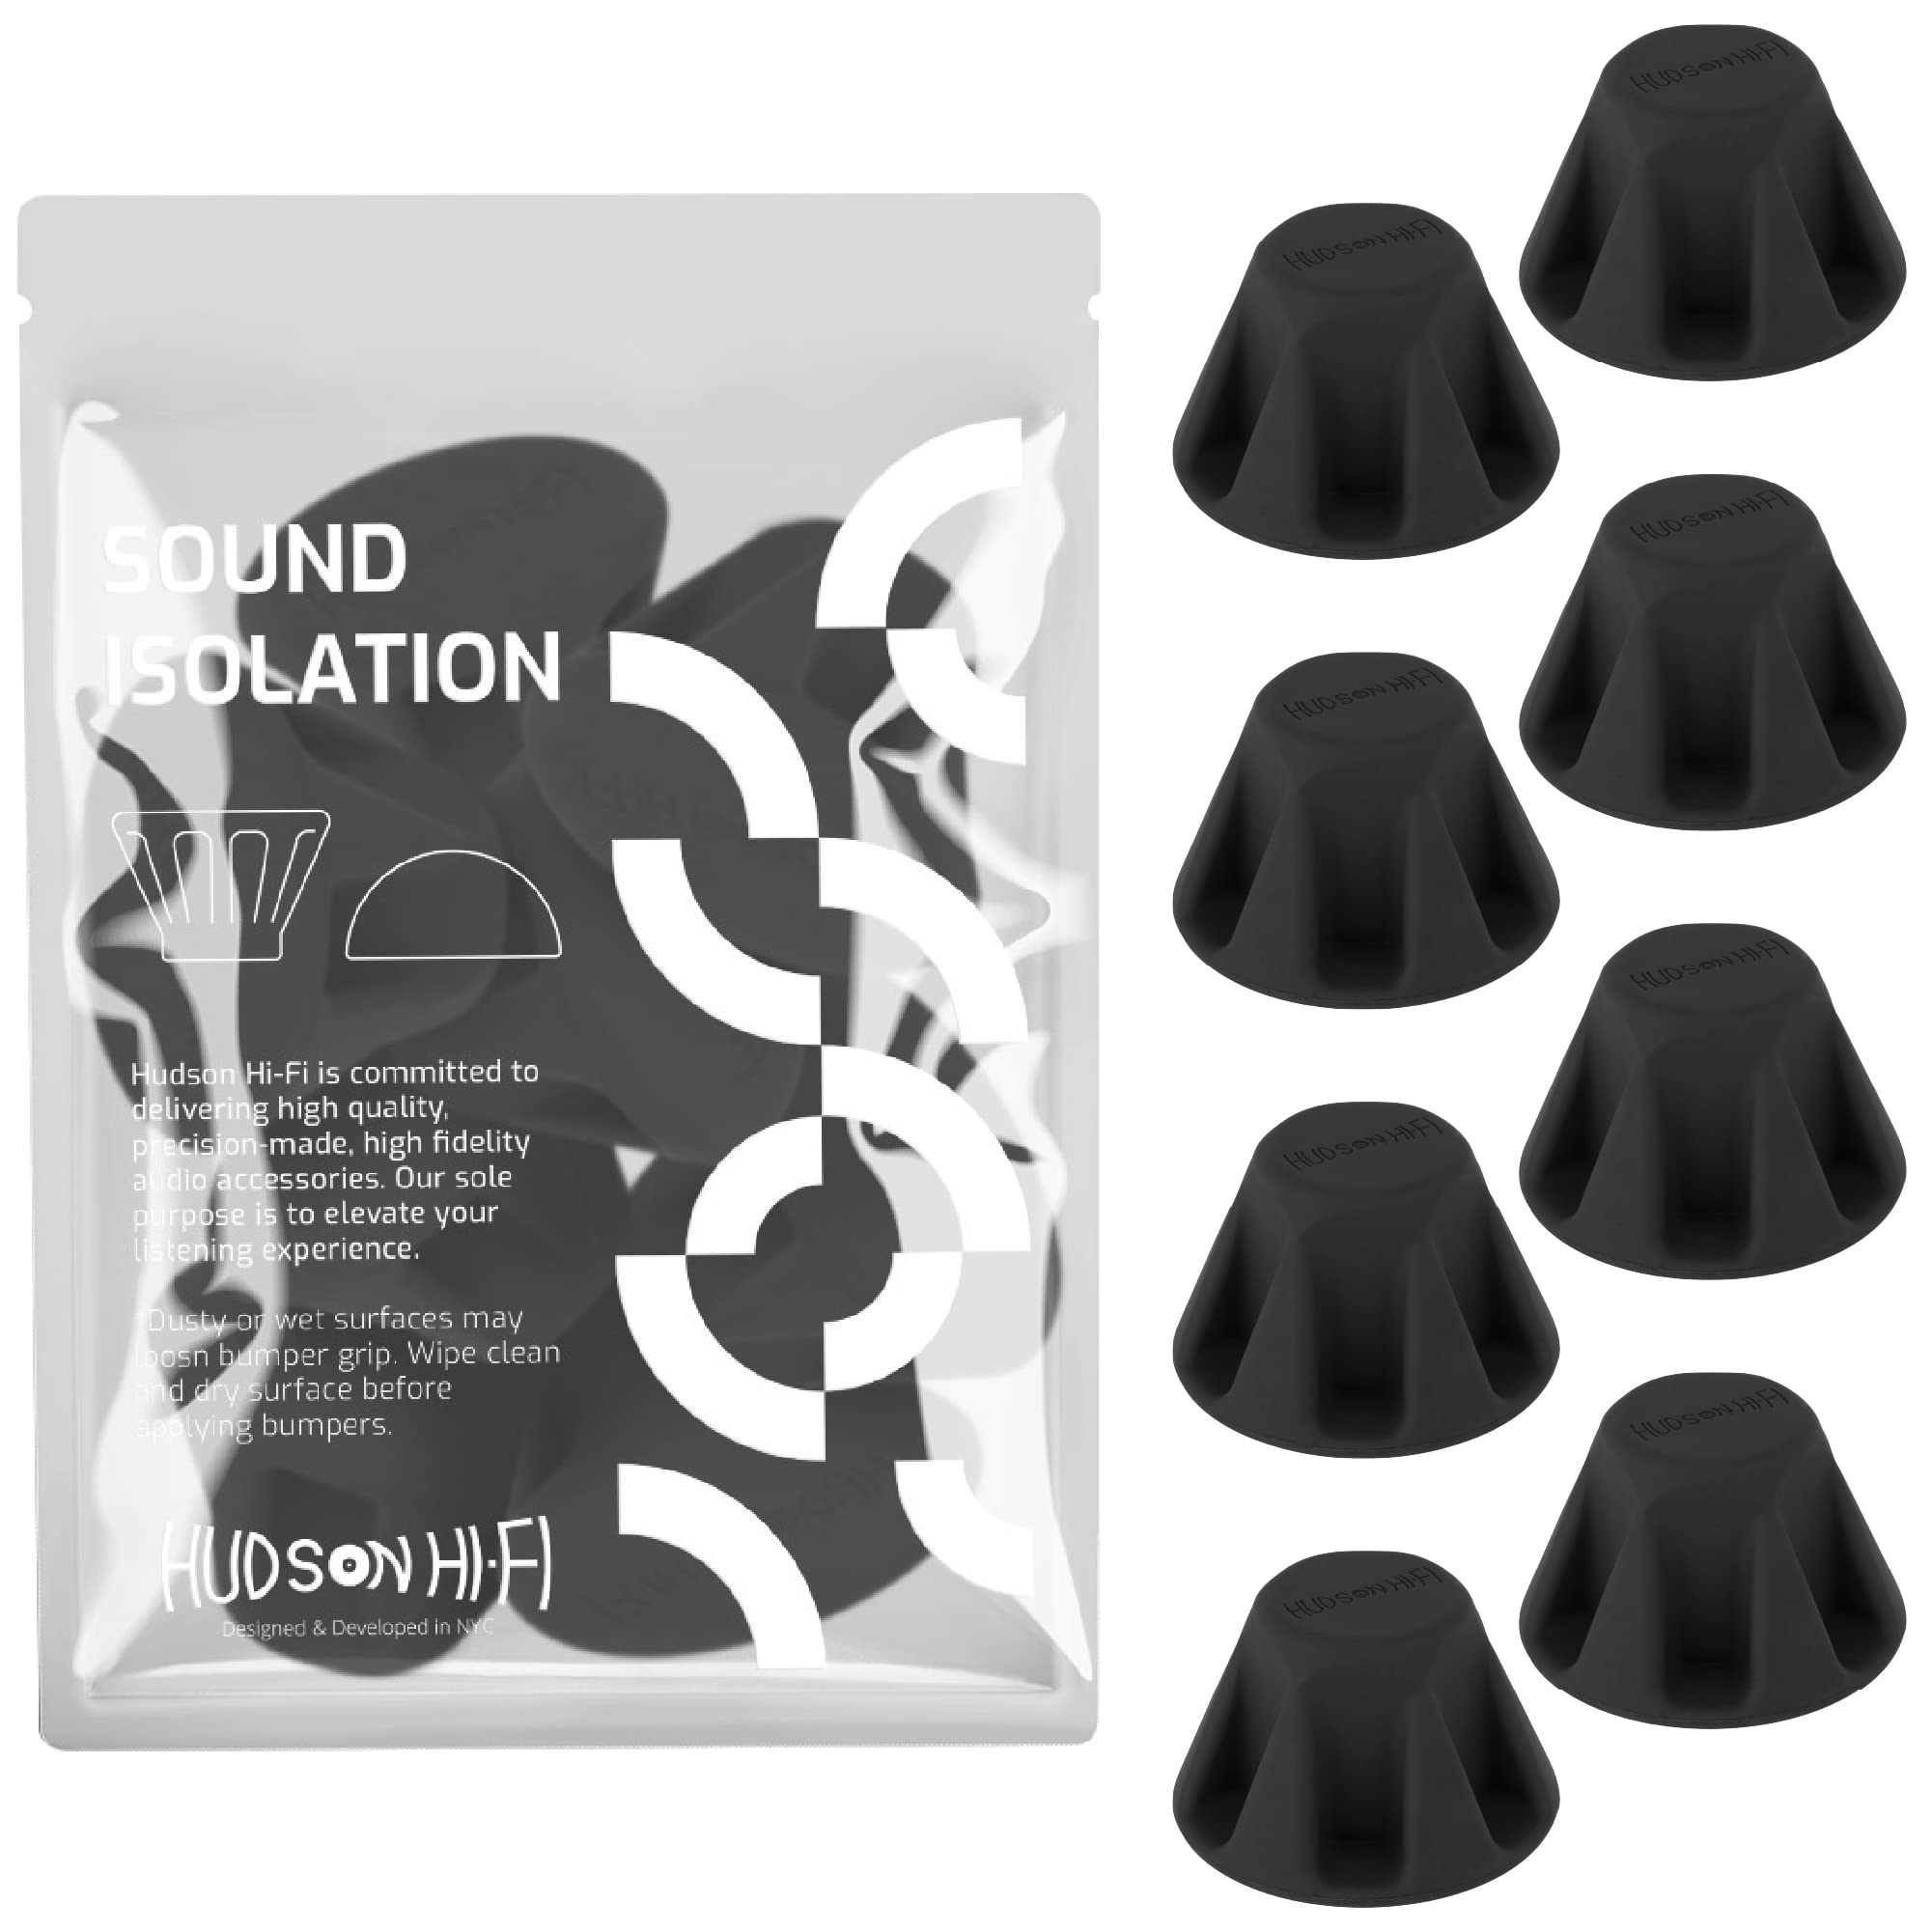 1.5” Bigfoot Isolation Feet - Non Adhesive Rubber Stoppers - 8 Pack Non-Skid Rubber Bumpers for Turntable Isolation - Anti Vibration Pads - 50 Duro